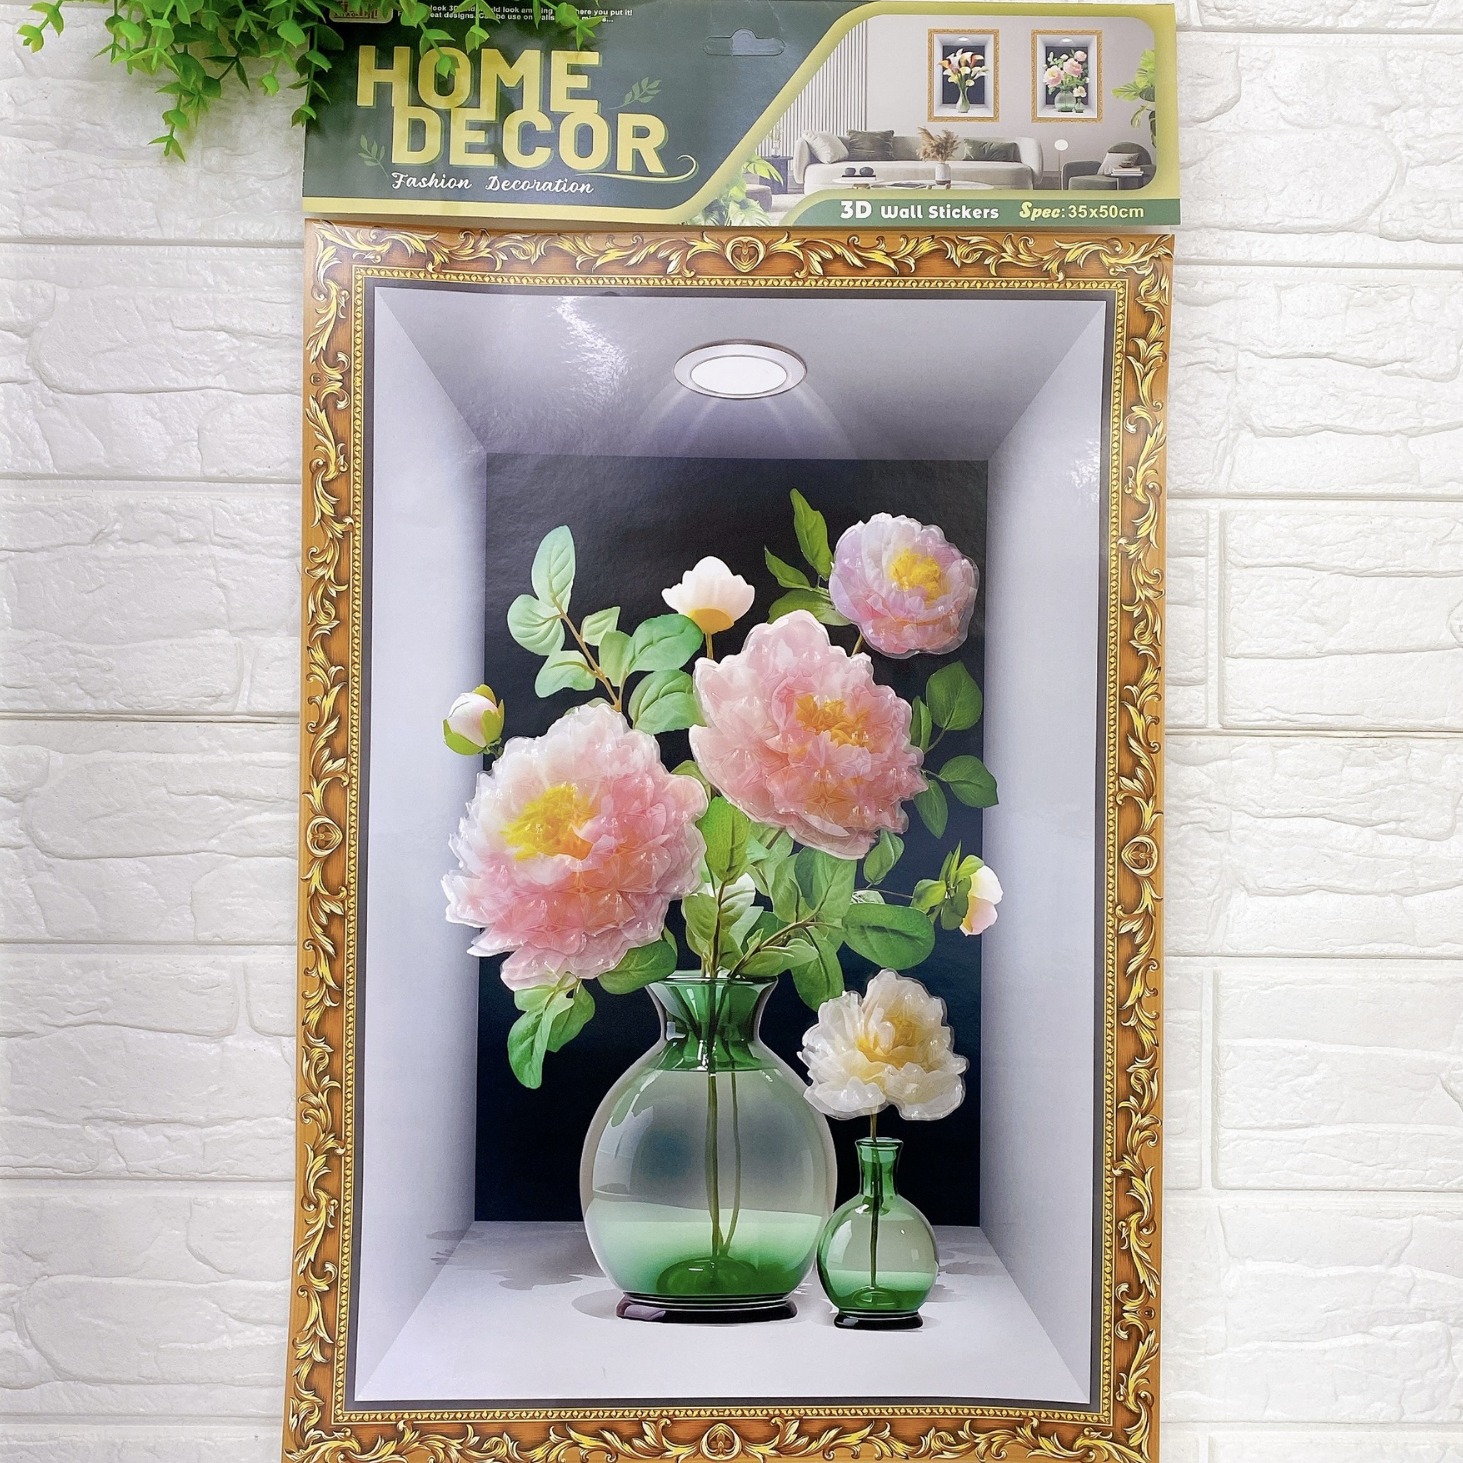 Vase Photo Frame Decorative Furniture Wall Stickers Pvc Vase Living Room Bedroom Entrance Wall Decorative Three-Dimensional Layer Stickers